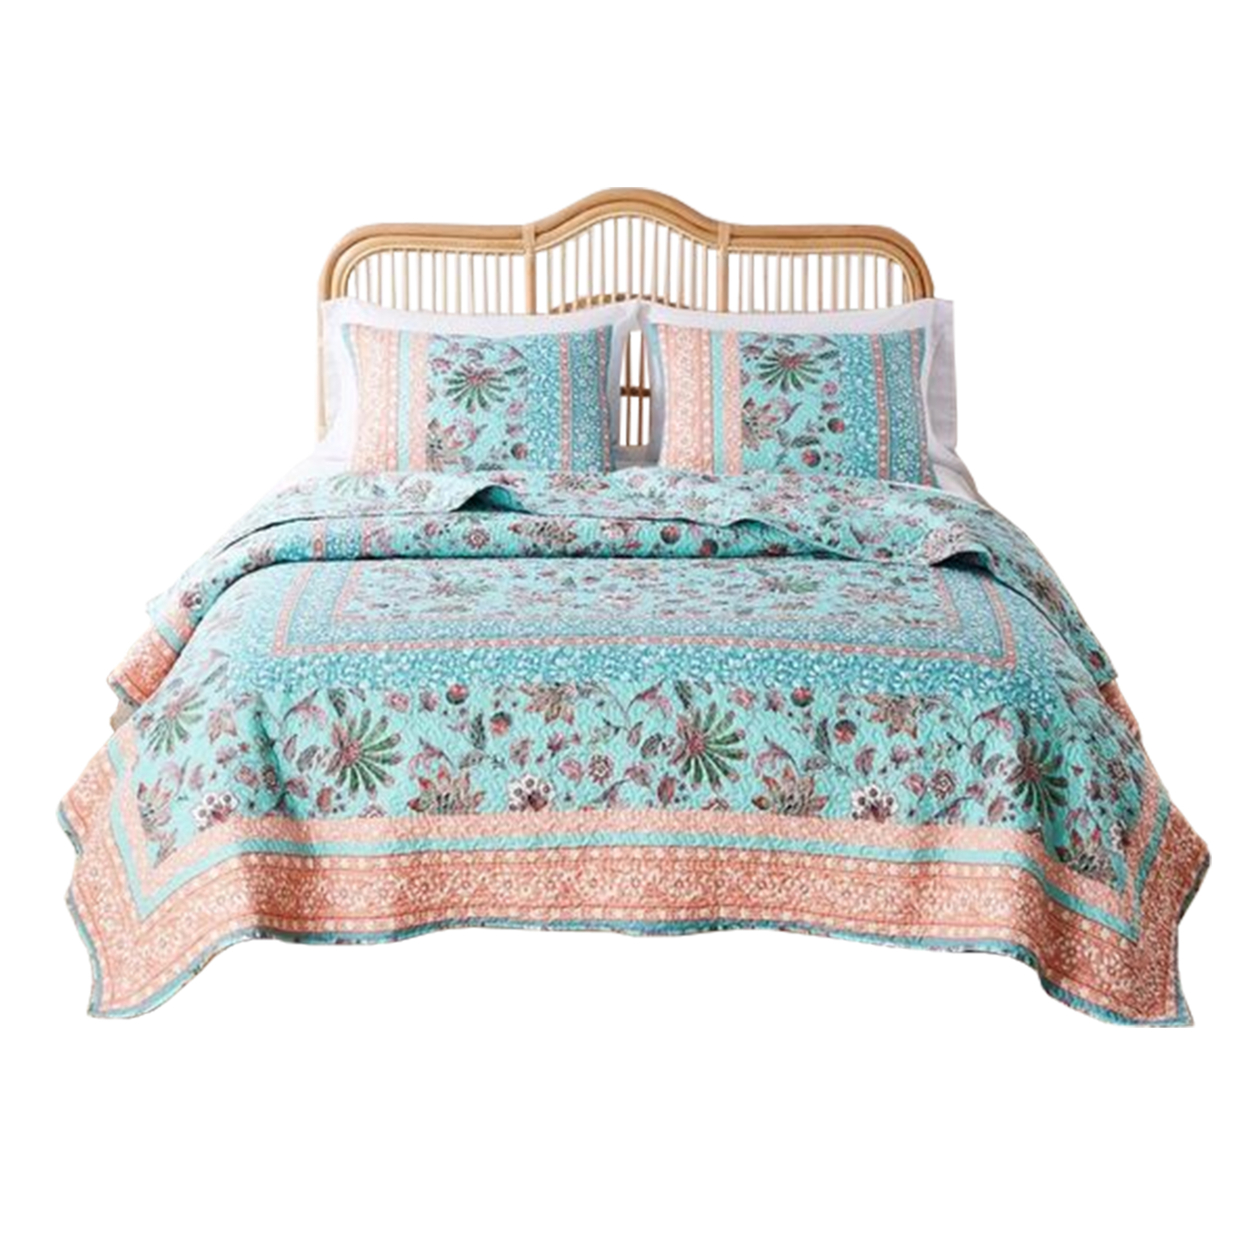 3 Piece Full Queen Quilt Set With Floral Print, Blue And White- Saltoro Sherpi